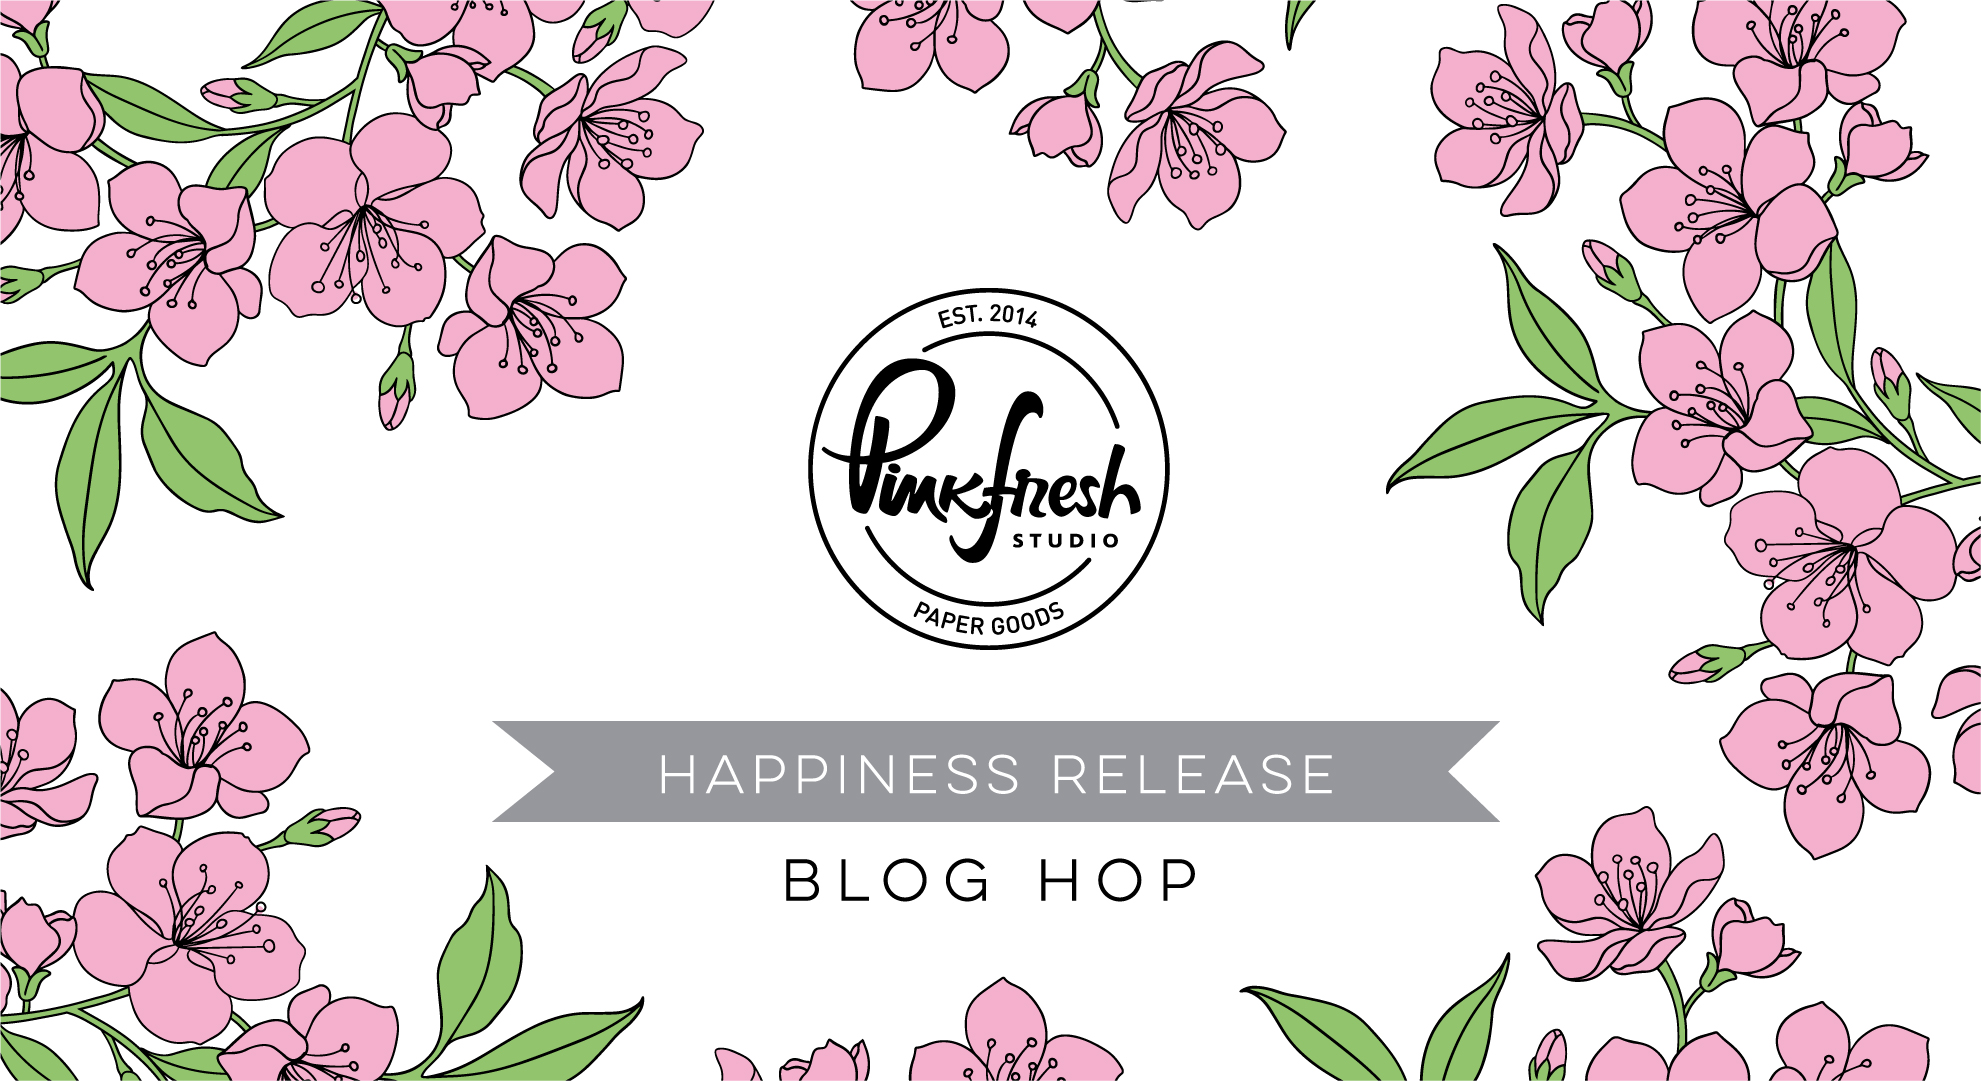 You are currently viewing Pinkfresh Studio “Happiness” Release Blog Hop